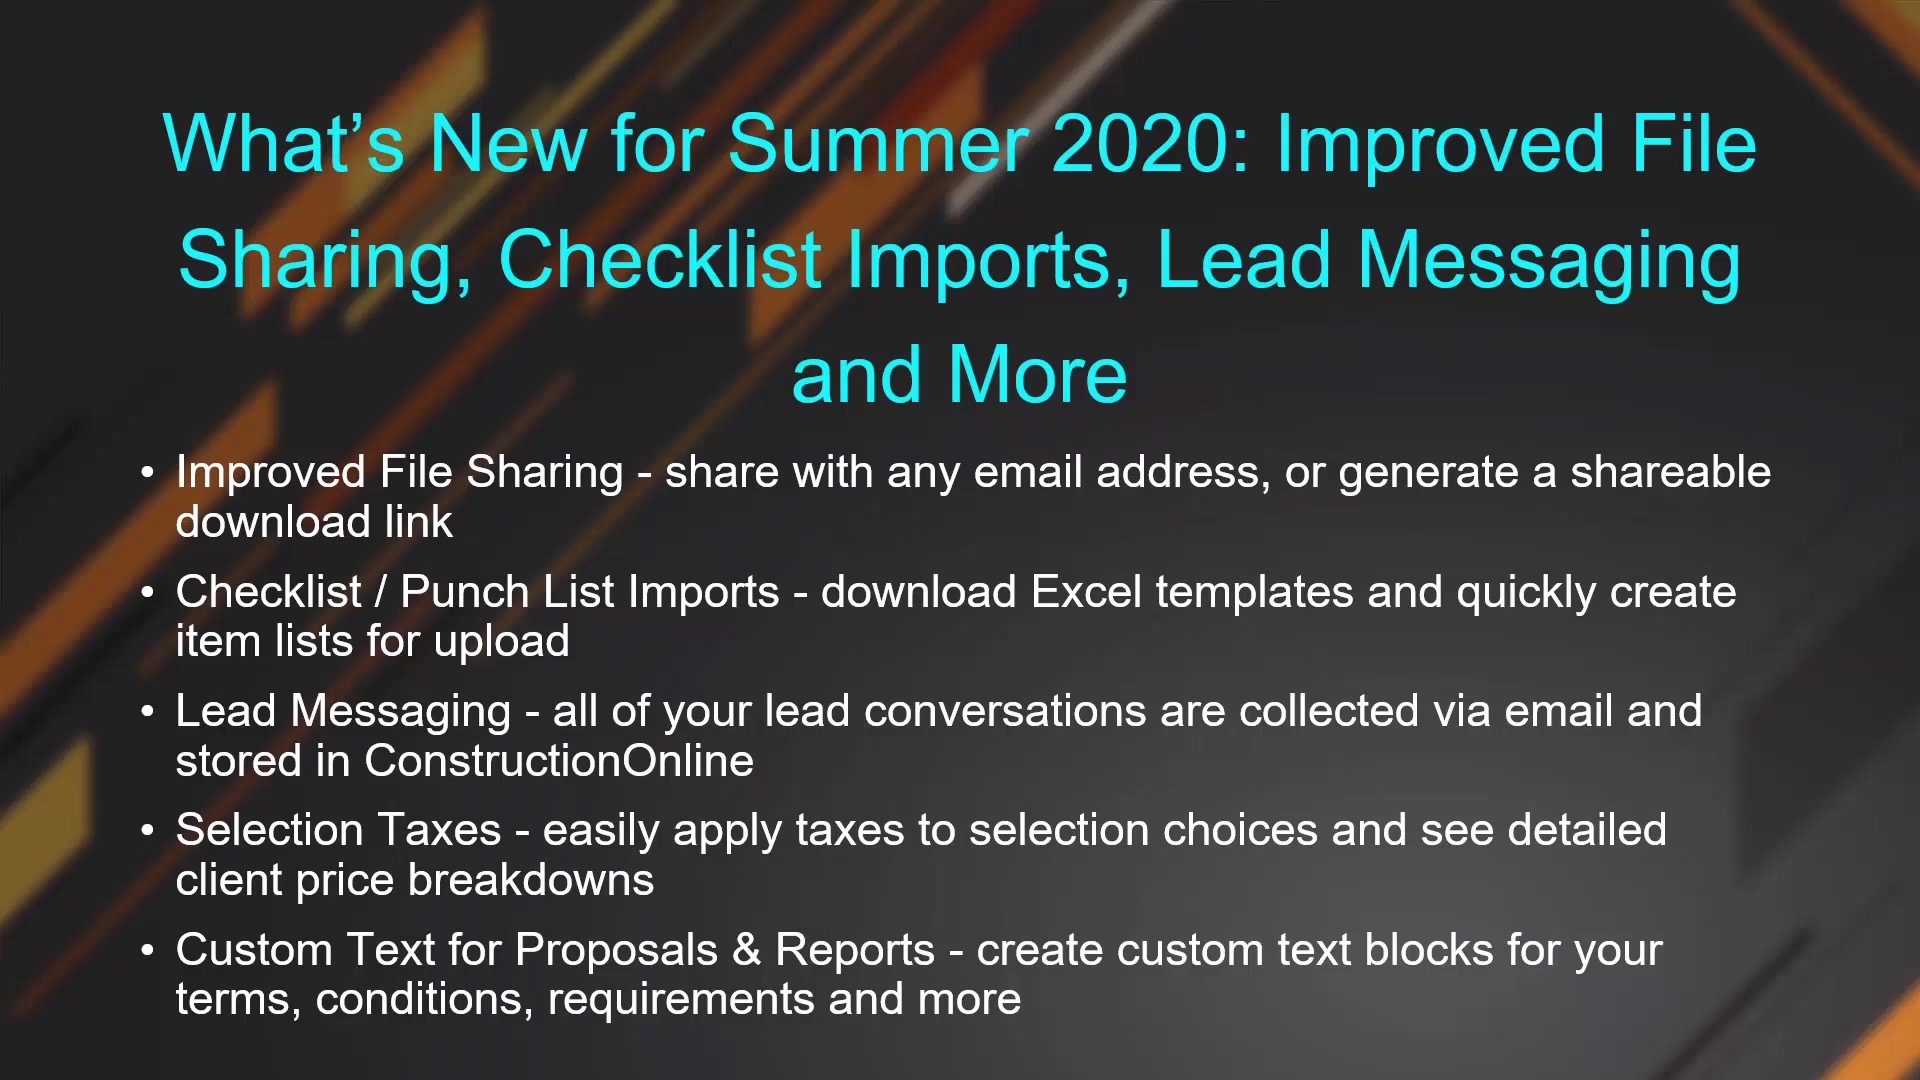 What’s New for Summer 2020 - Improved File Sharing, Checklist Imports, Lead Messaging and More